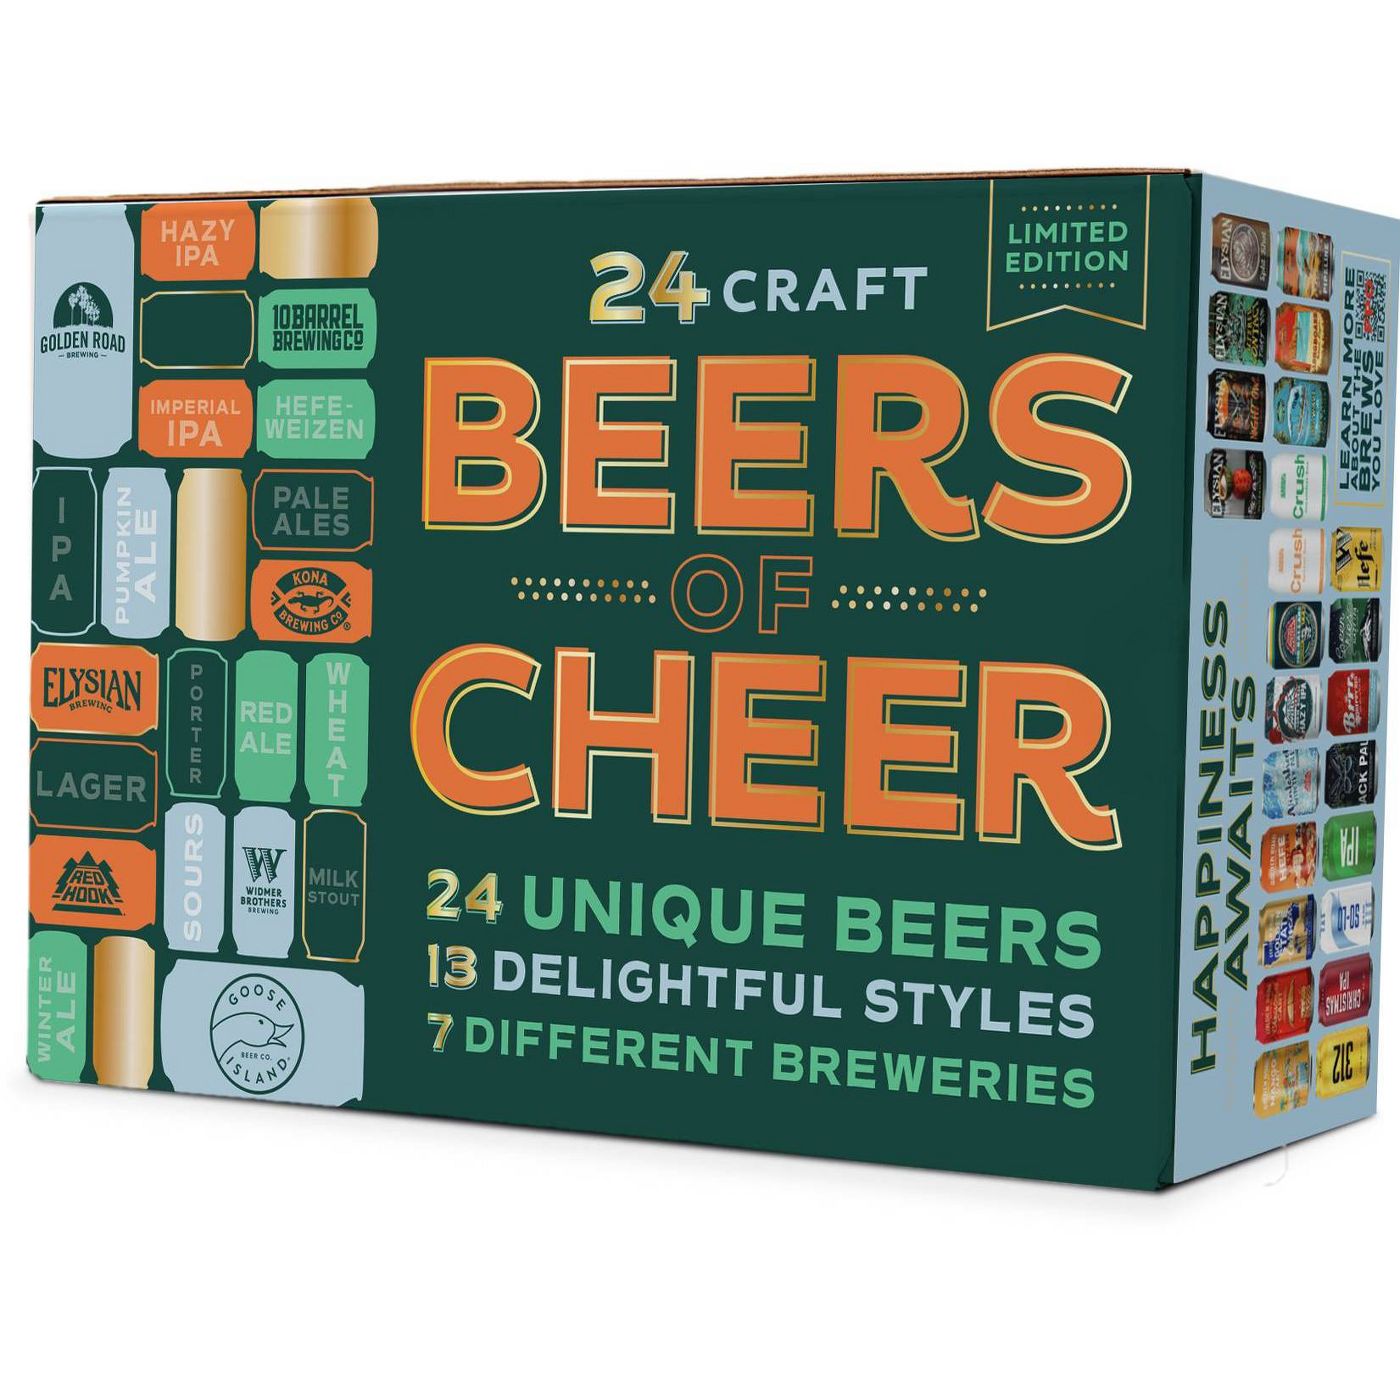 24 Craft Beers of Cheer Advent Calendar Beer Box - 24pk:12 fl oz Cans